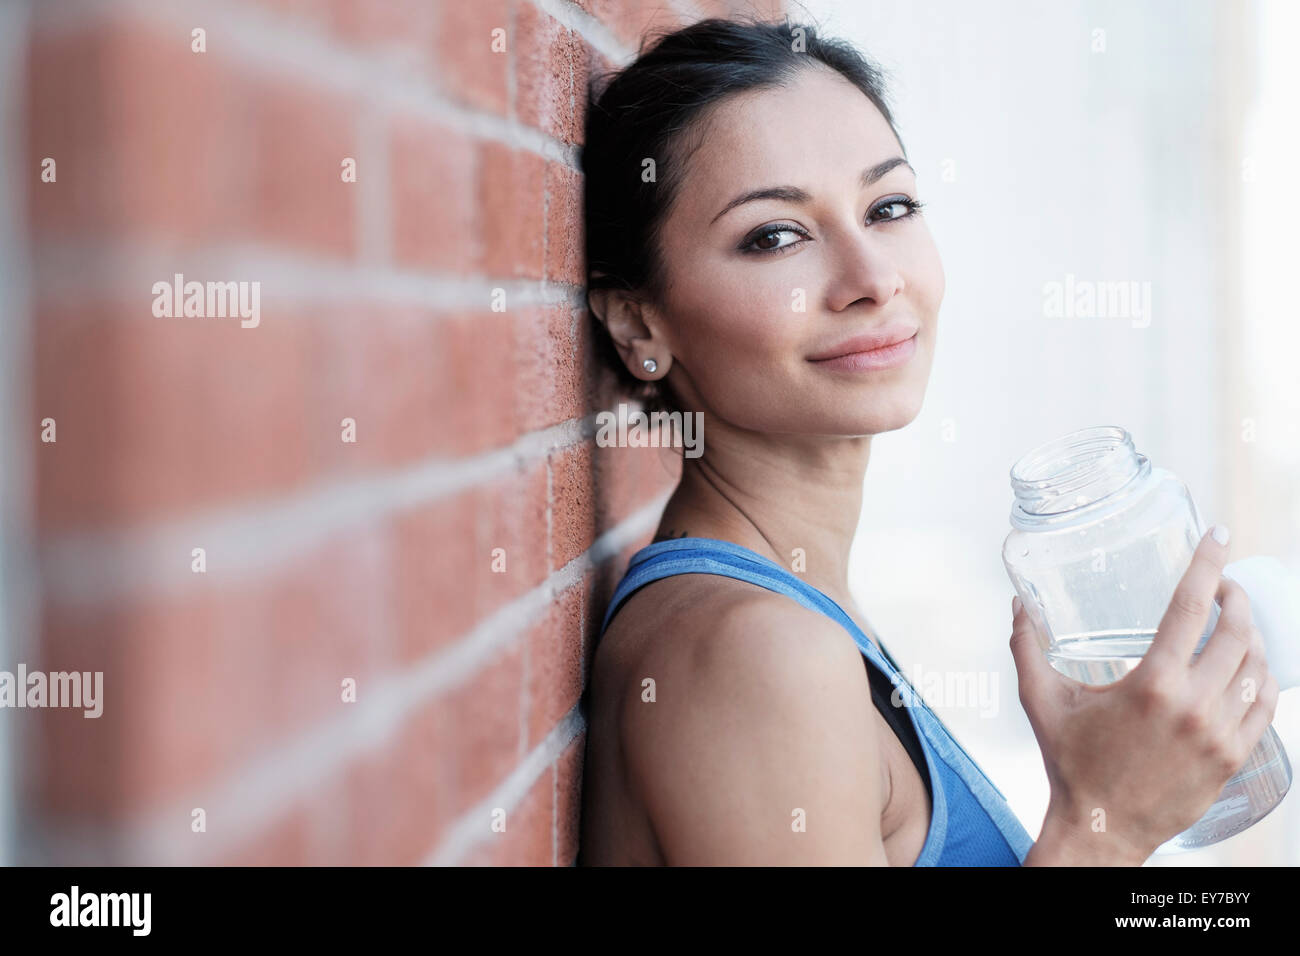 Portrait of young woman by brick wall Stock Photo